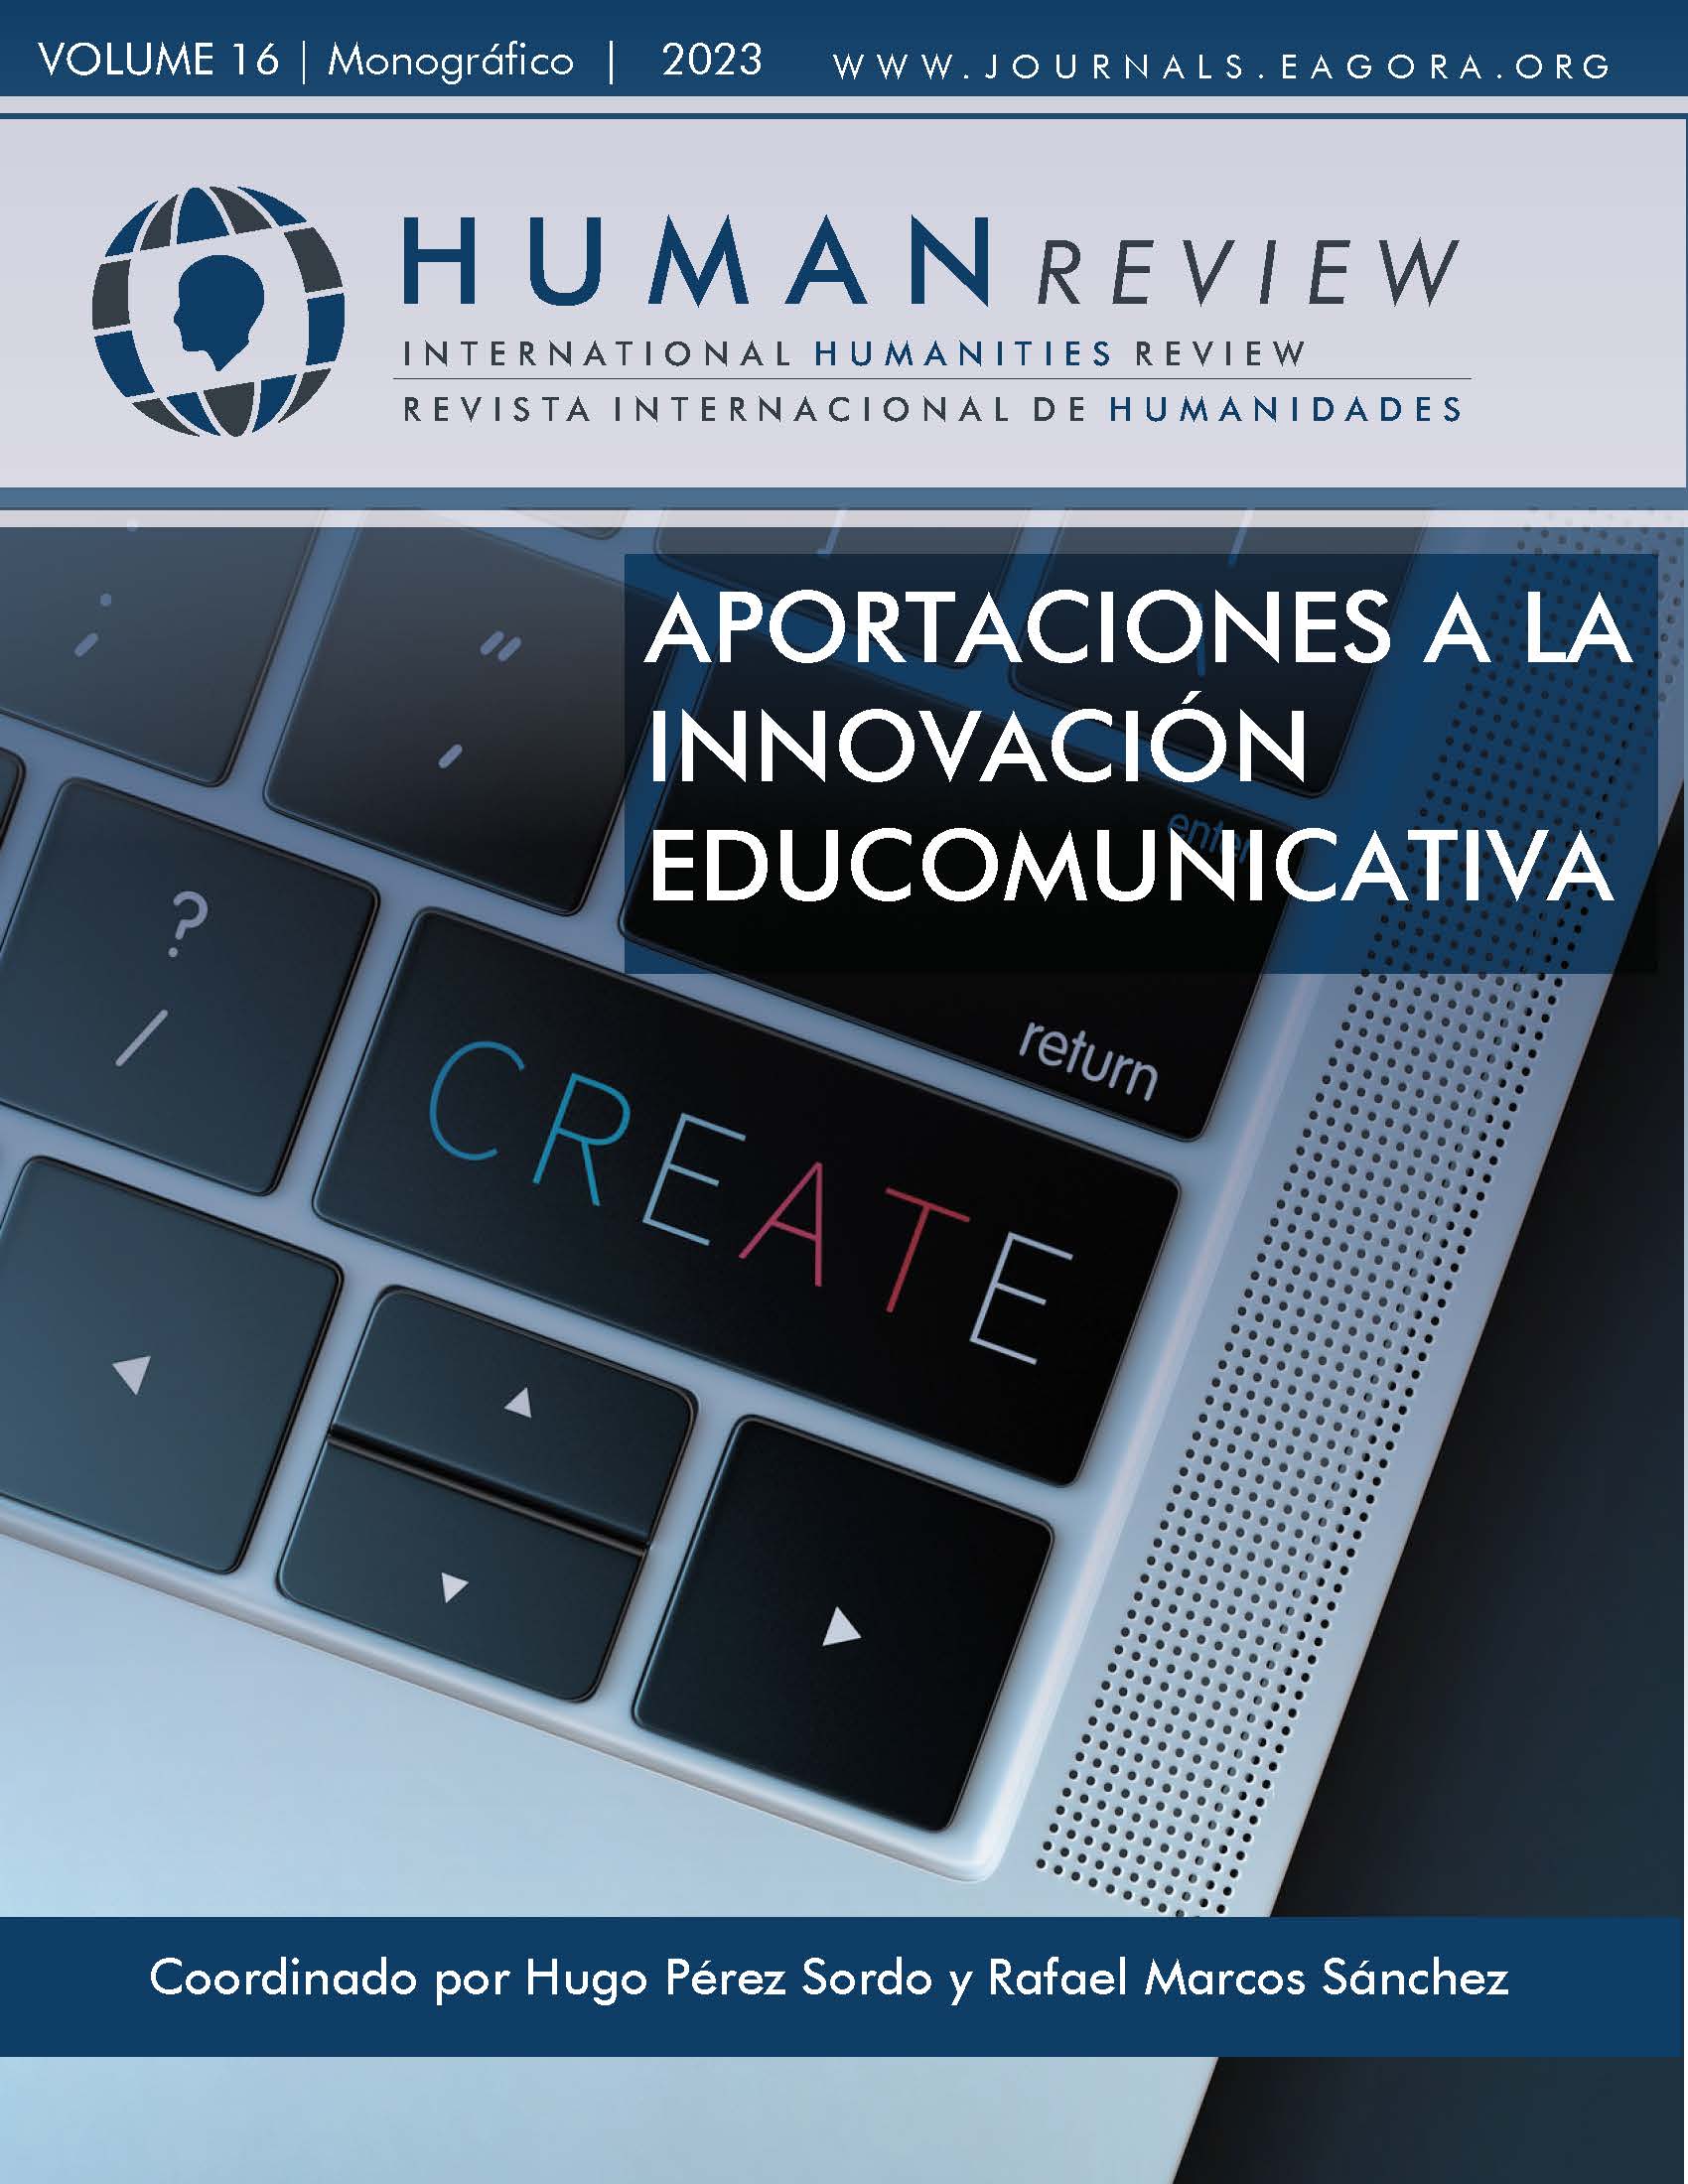 					View Vol. 16 No. 5 (2023): Monograph: "Contributions to educational-communicative innovation"
				